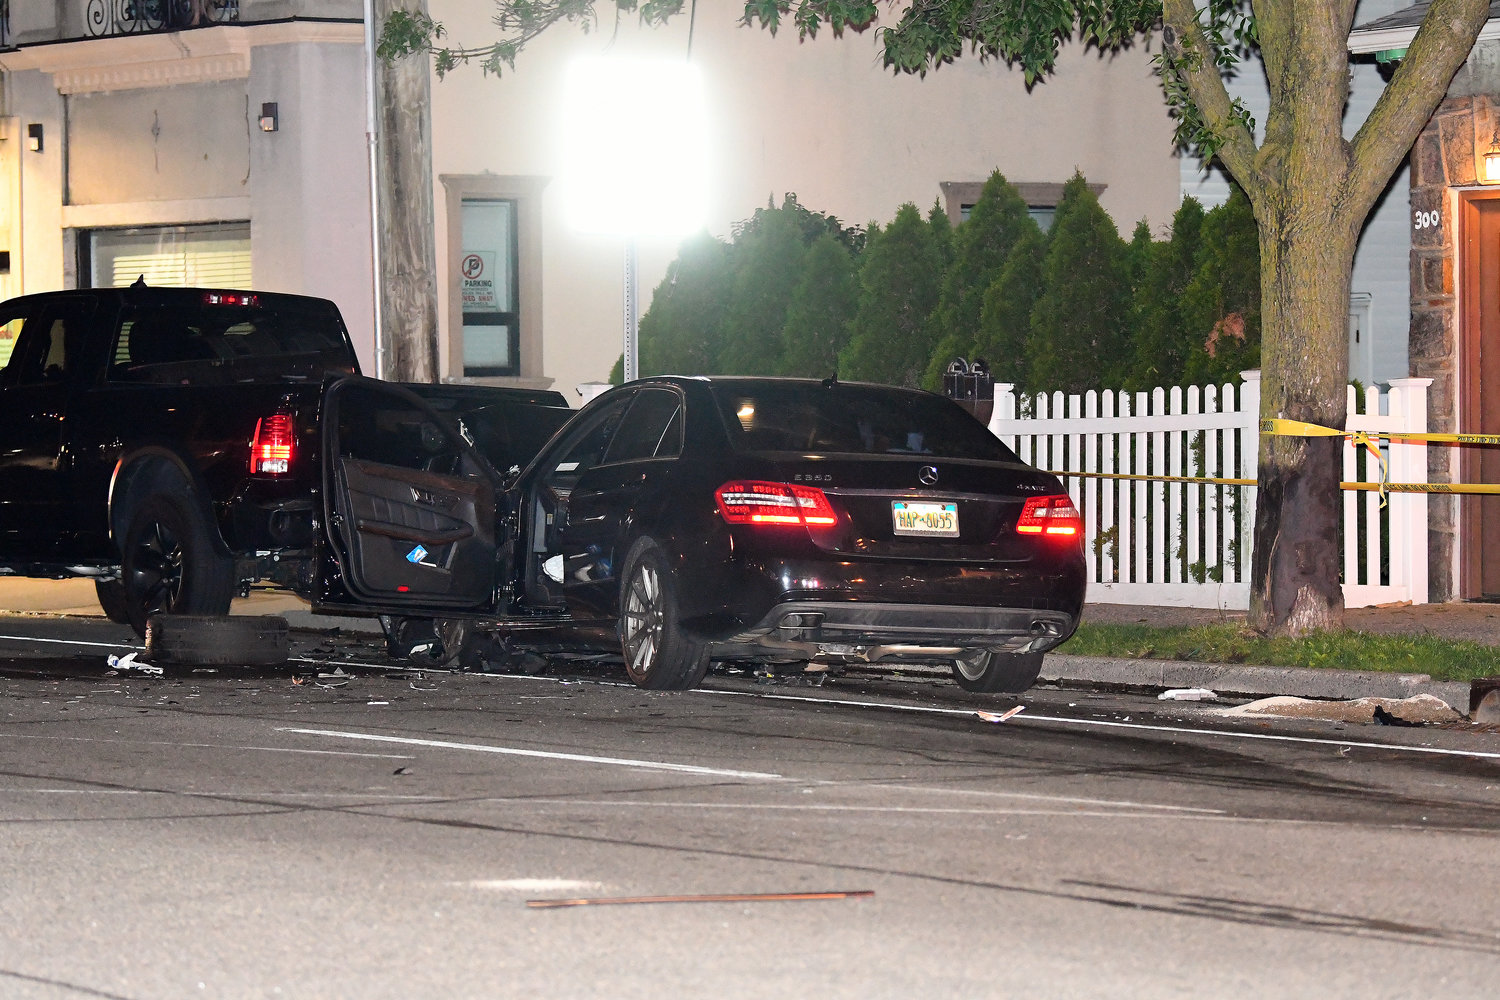 The Mercedes Benz continued after striking the Lincoln Town Car and smashed into the back of a parked vehicle.